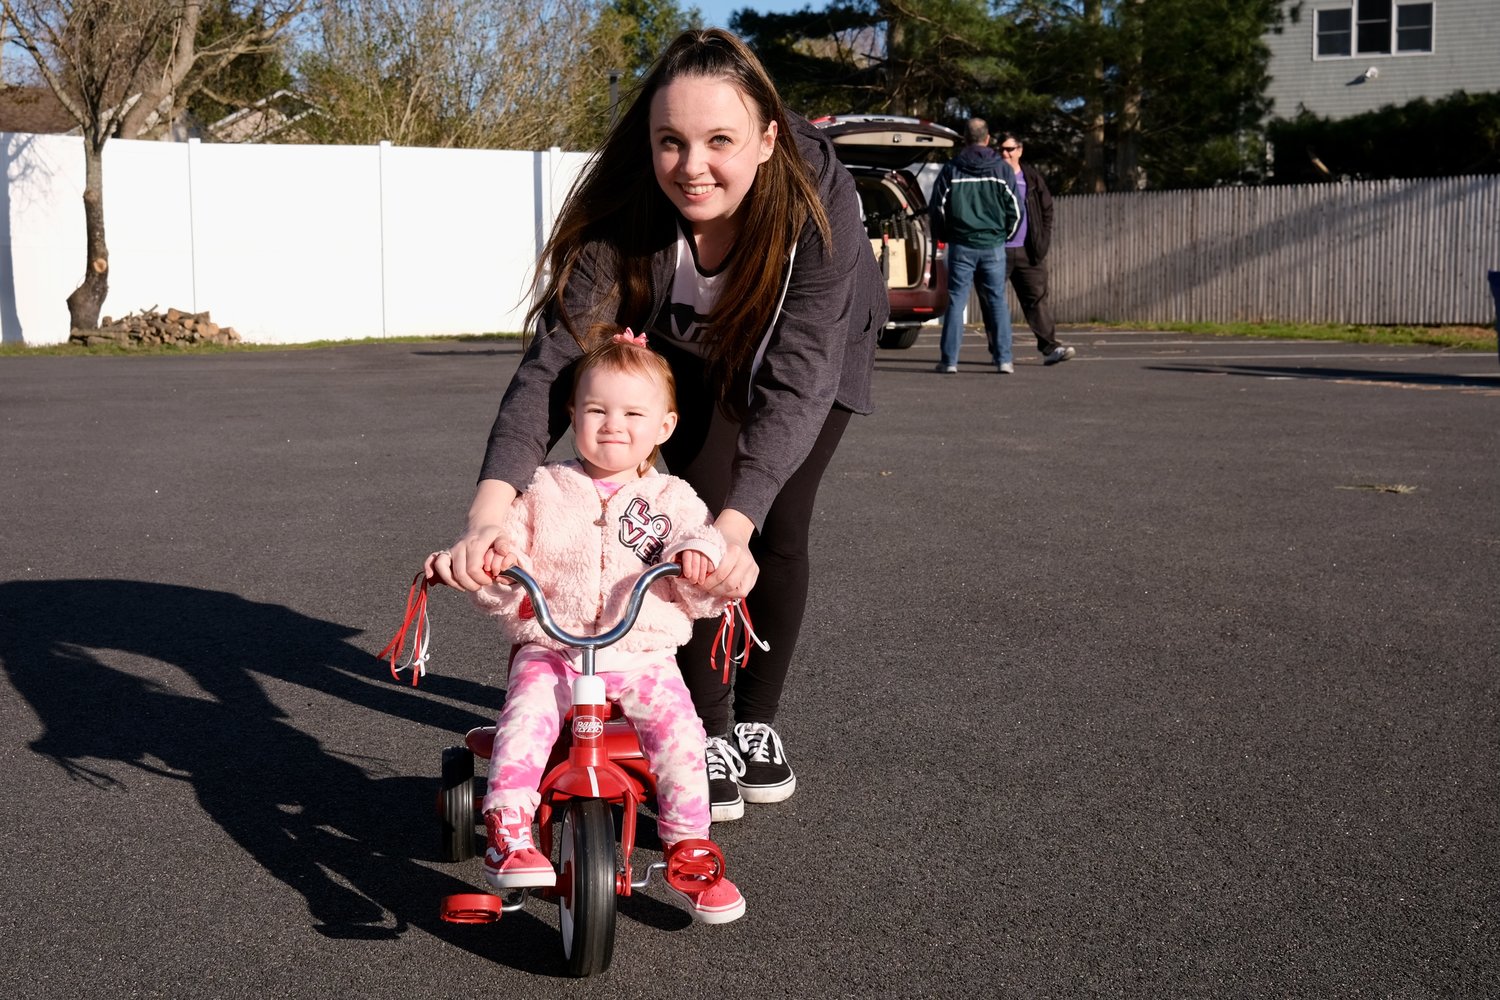 Noelle Vierkant, 2, gets a push from her mom, Kelsey Preble, as she pedals around the parking lot of the CFP Arts, Wellness, and Community Center during a Bike Safety Forum on Wednesday, April 20.